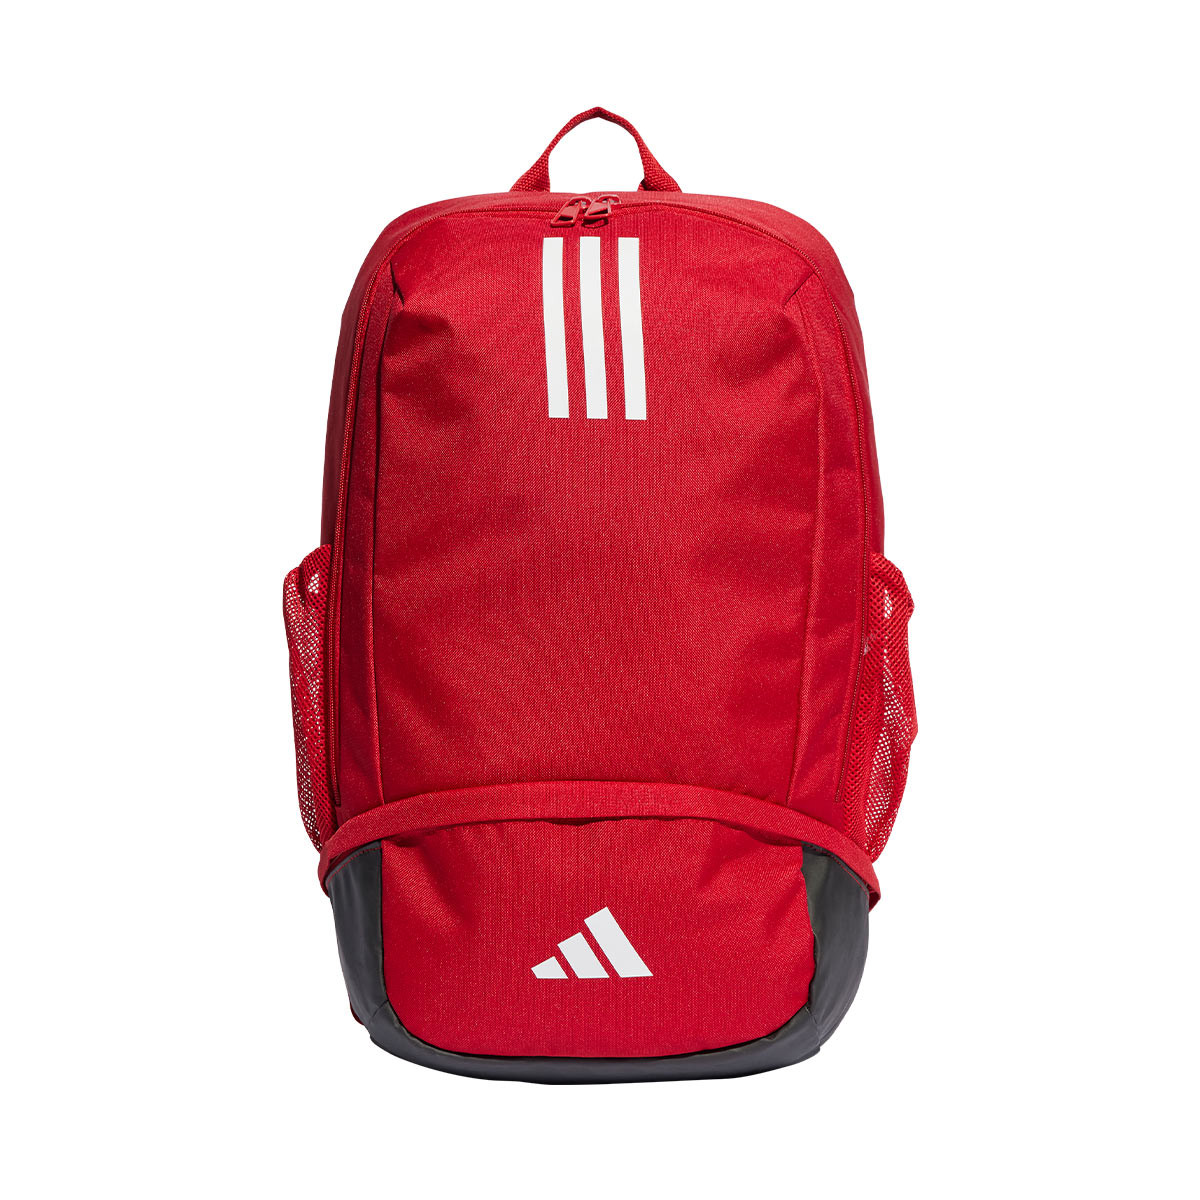 Amazon.com | adidas Defender Sports Backpack, Team Power Red, One Size |  Casual Daypacks